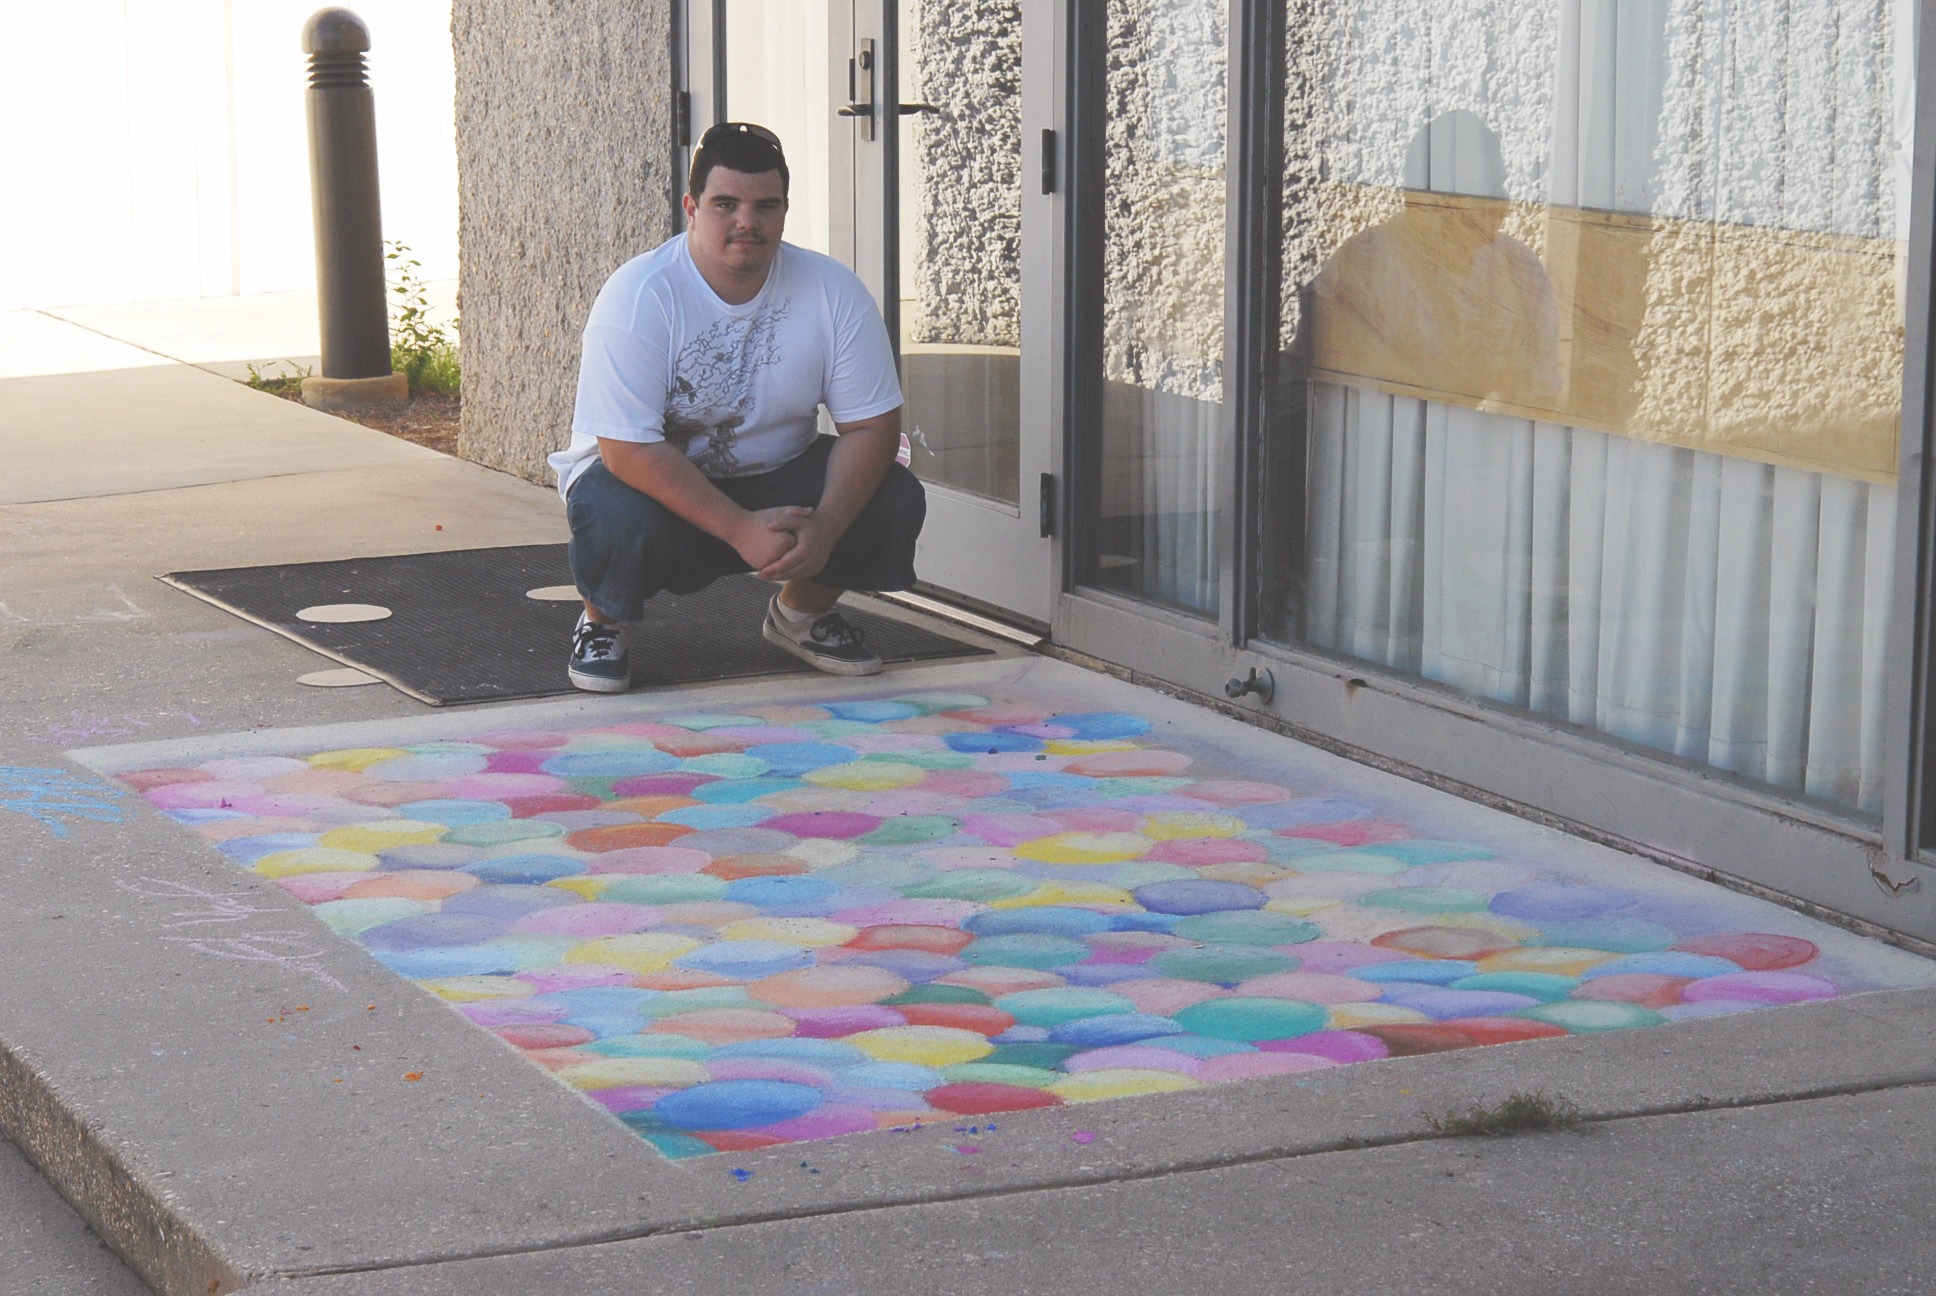 Art students demonstrate skills with chalk drawing